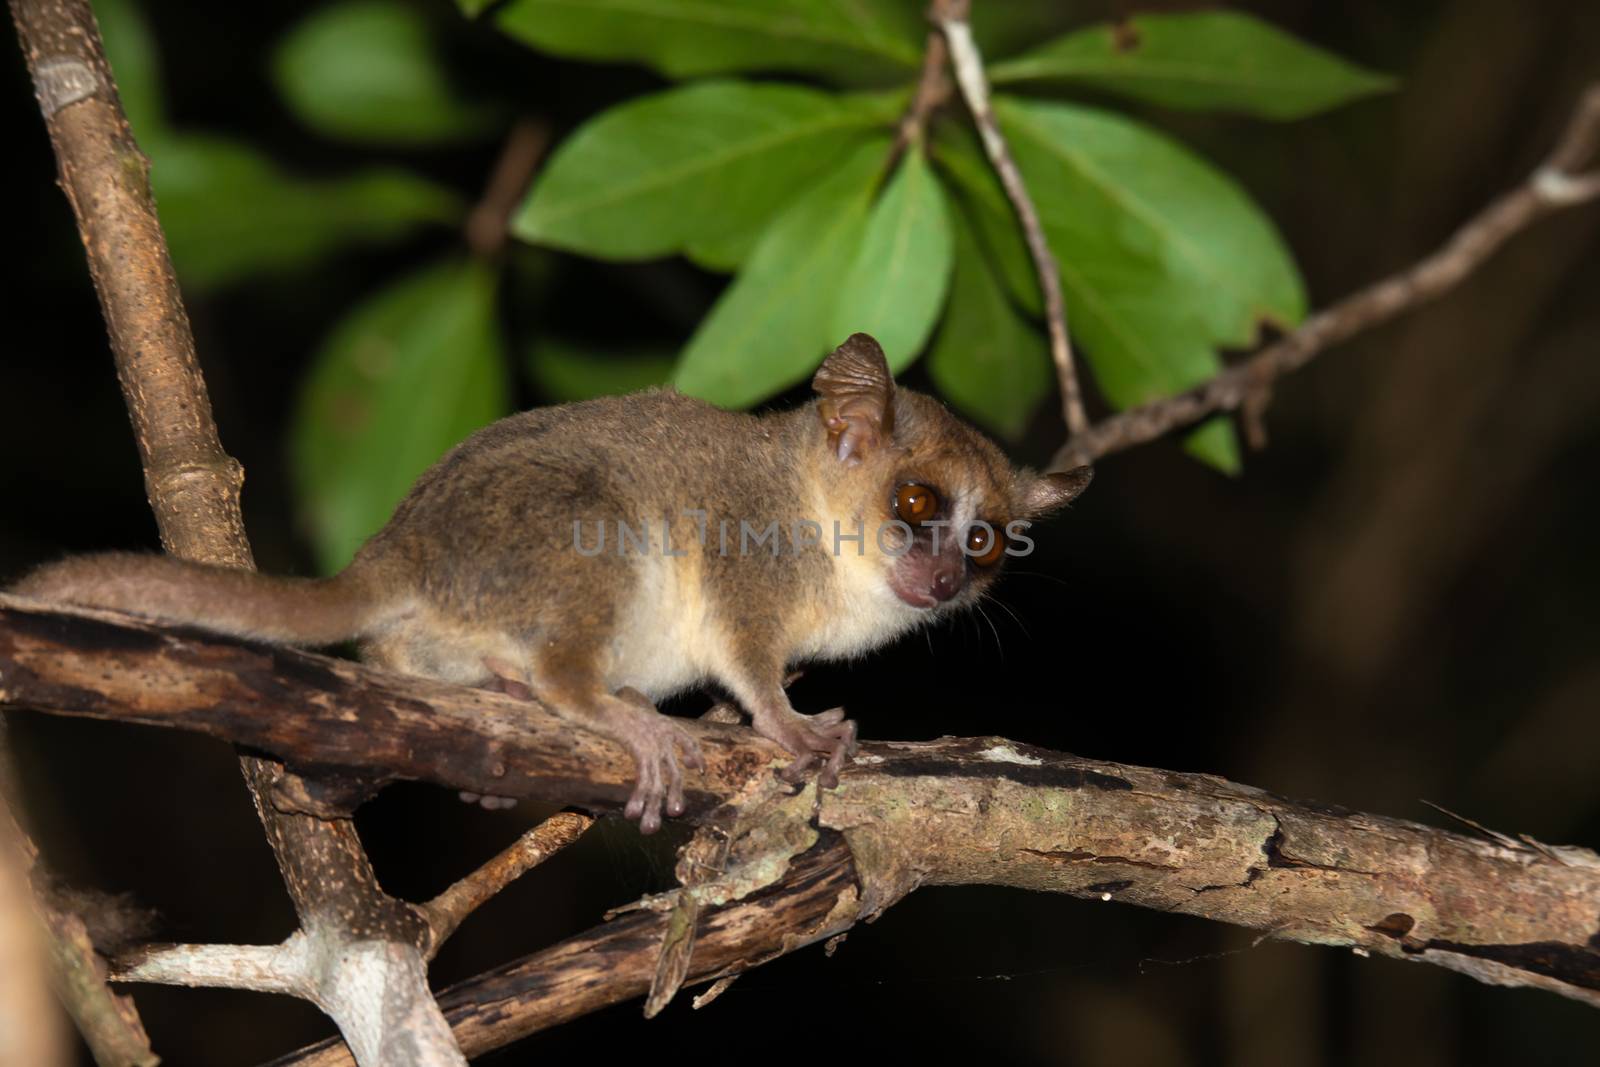 One little mouse lemur on a branch, taken at night